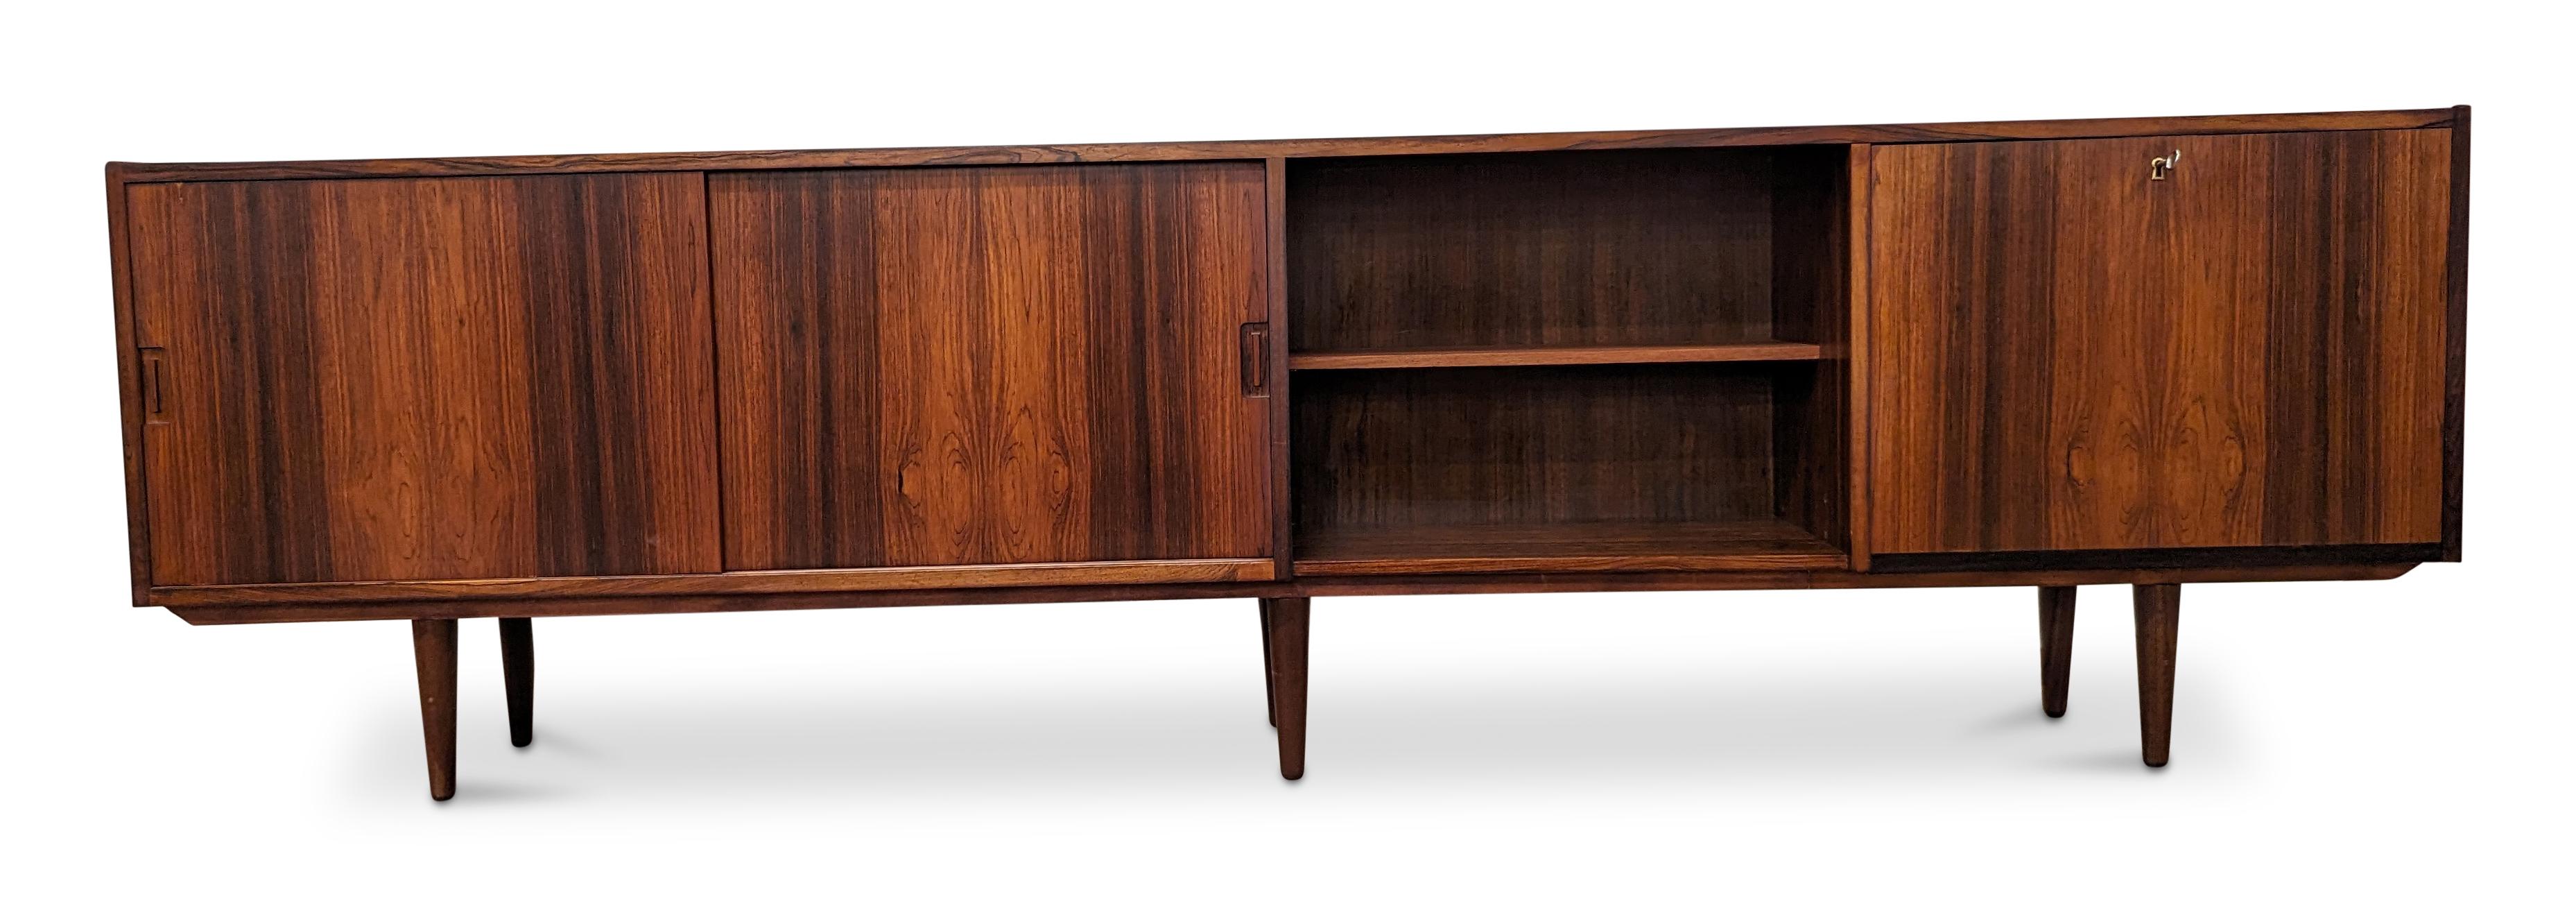 Vintage Danish mid-century modern, made in the 1950's - Recently refurbished

Brazilian rosewood have been illegal to harvest since 1961 and on the U.N. CITES list of endangered spices since 1992. For each piece of rosewood furniture we import to